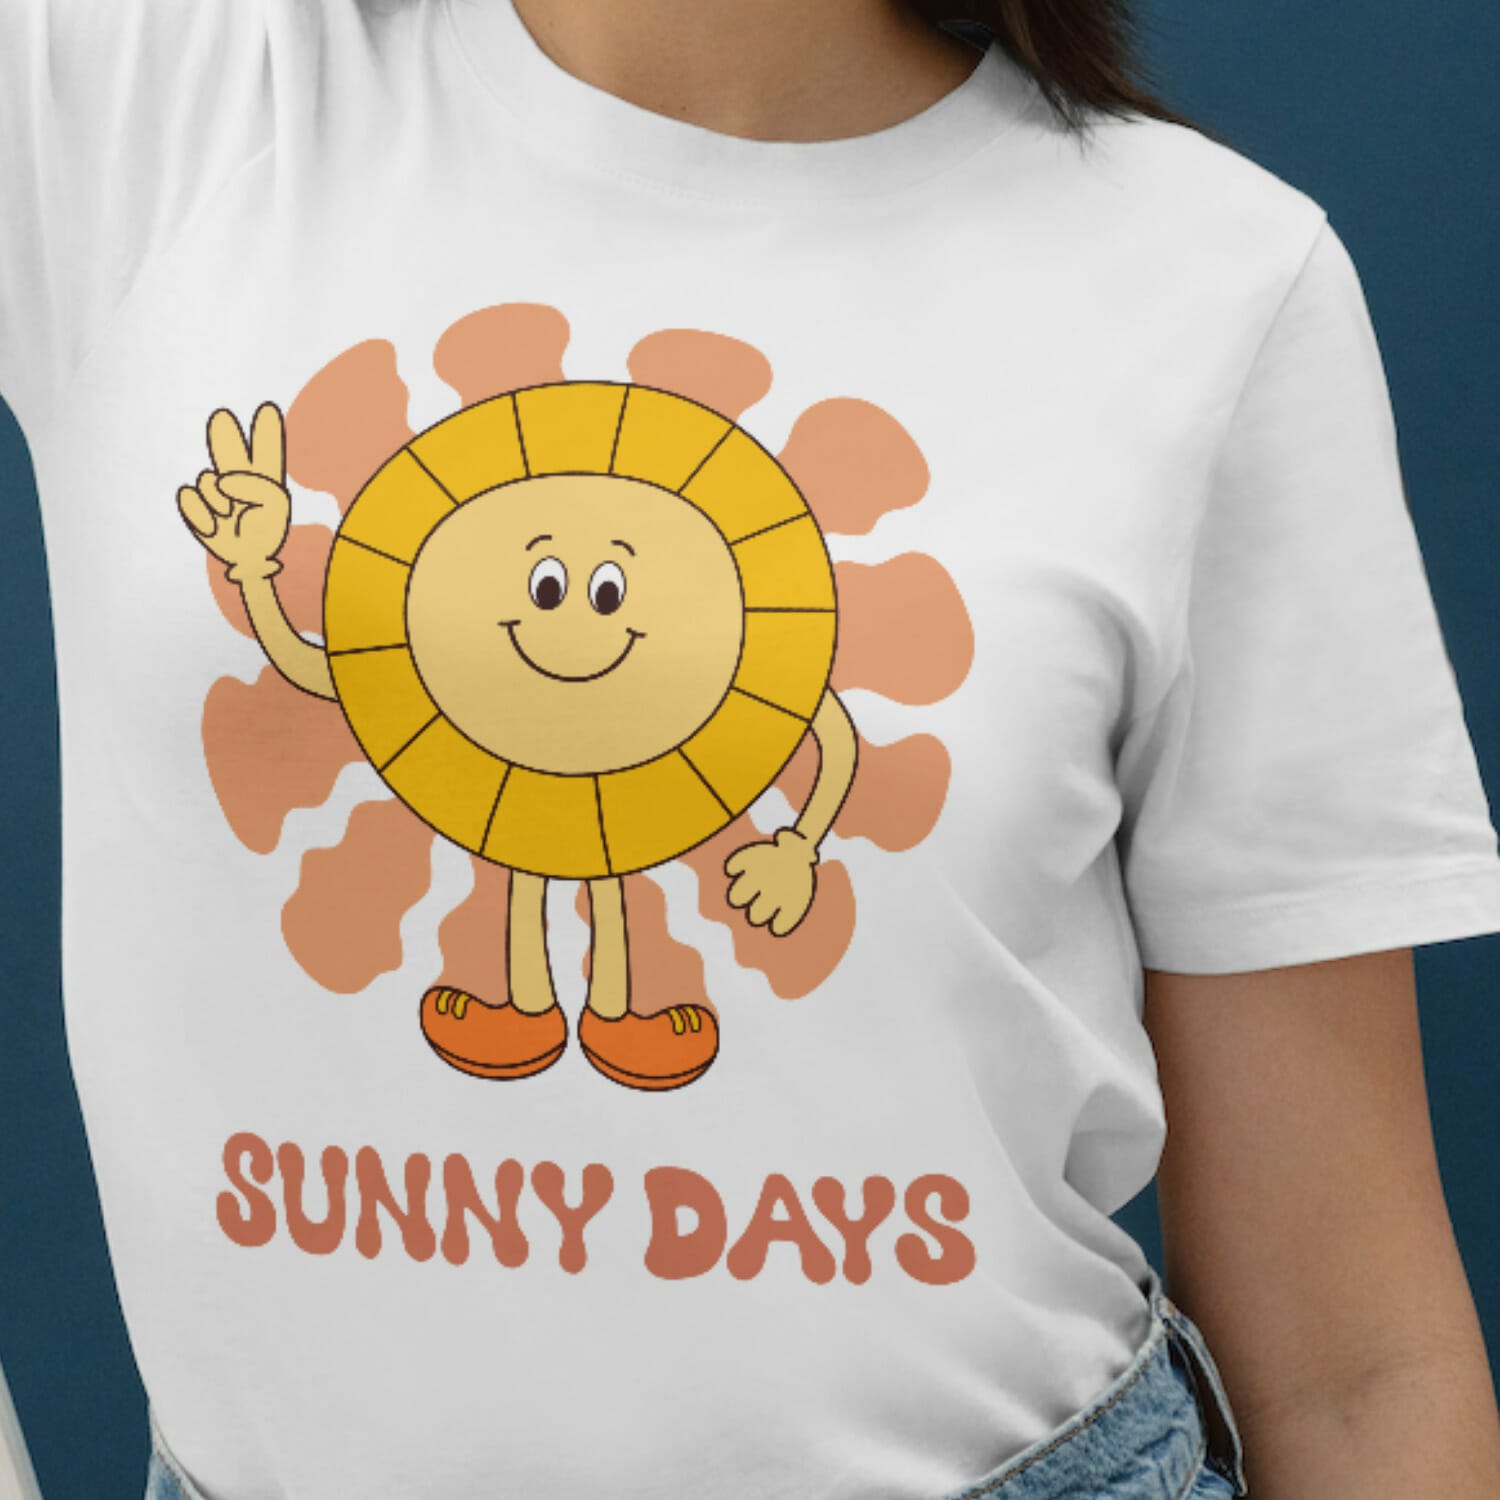 Sunny Days - Groovy Style Free T-shirt Design